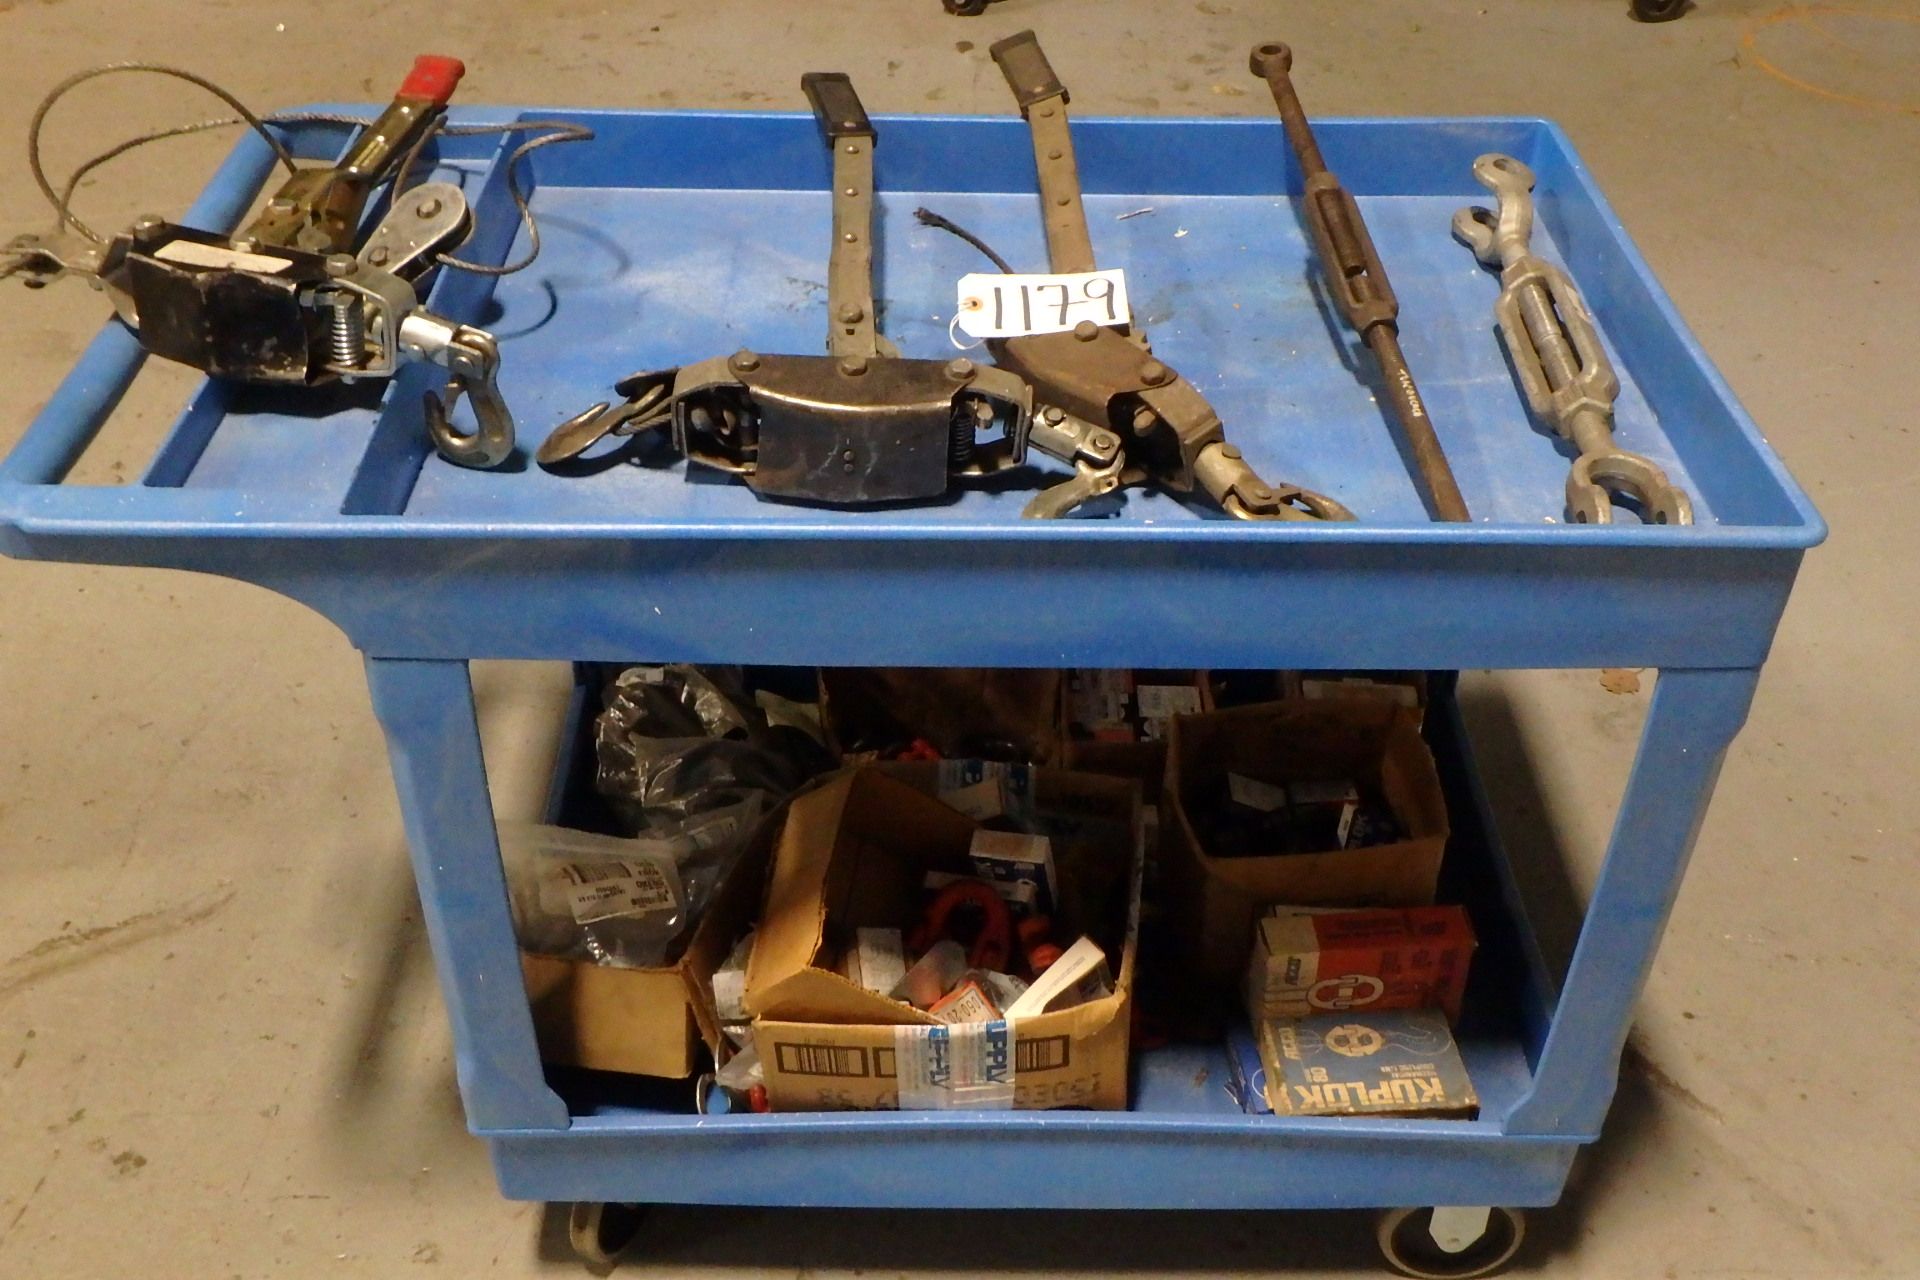 Lot Comprising (3) Come-A-Longs, Assorted Lifting Hooks & Clamps, w/ ULINE Cart; Assorted Lifting